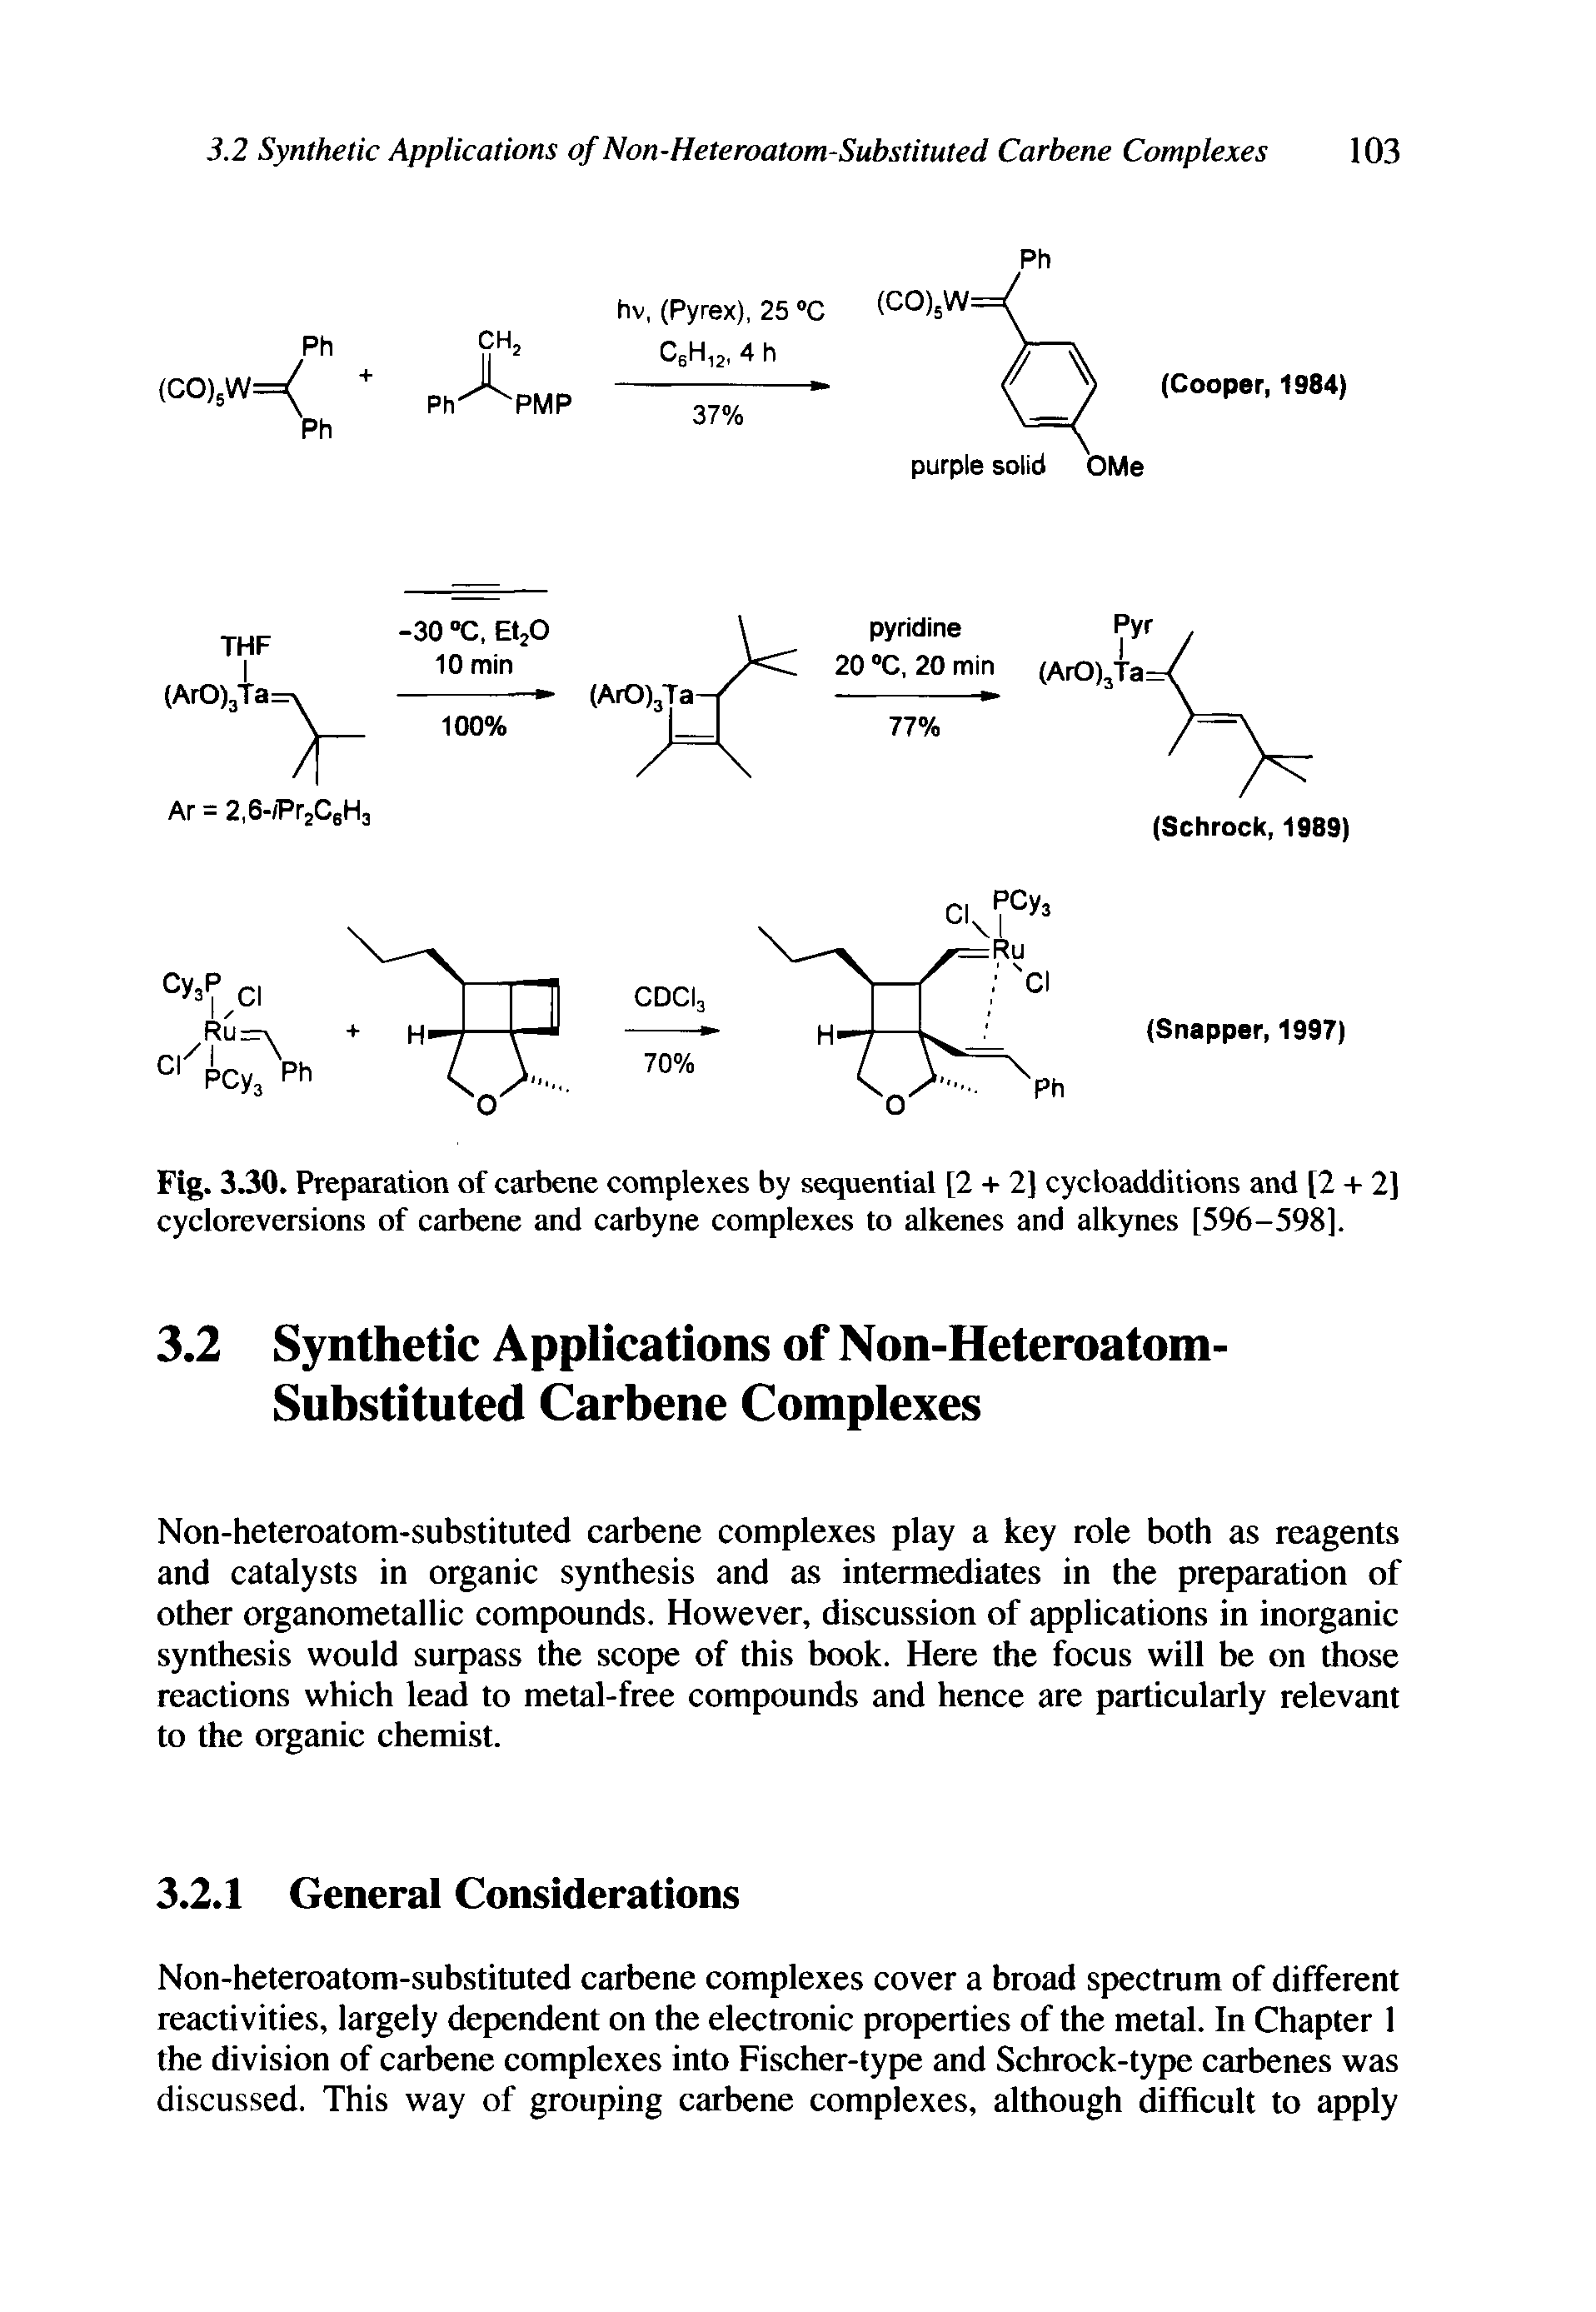 Fig. 3.30. Preparation of carbene complexes by sequential [2 + 2] cycloadditions and [2 + 2] cycloreversions of carbene and carbyne complexes to alkenes and alkynes [596-598].